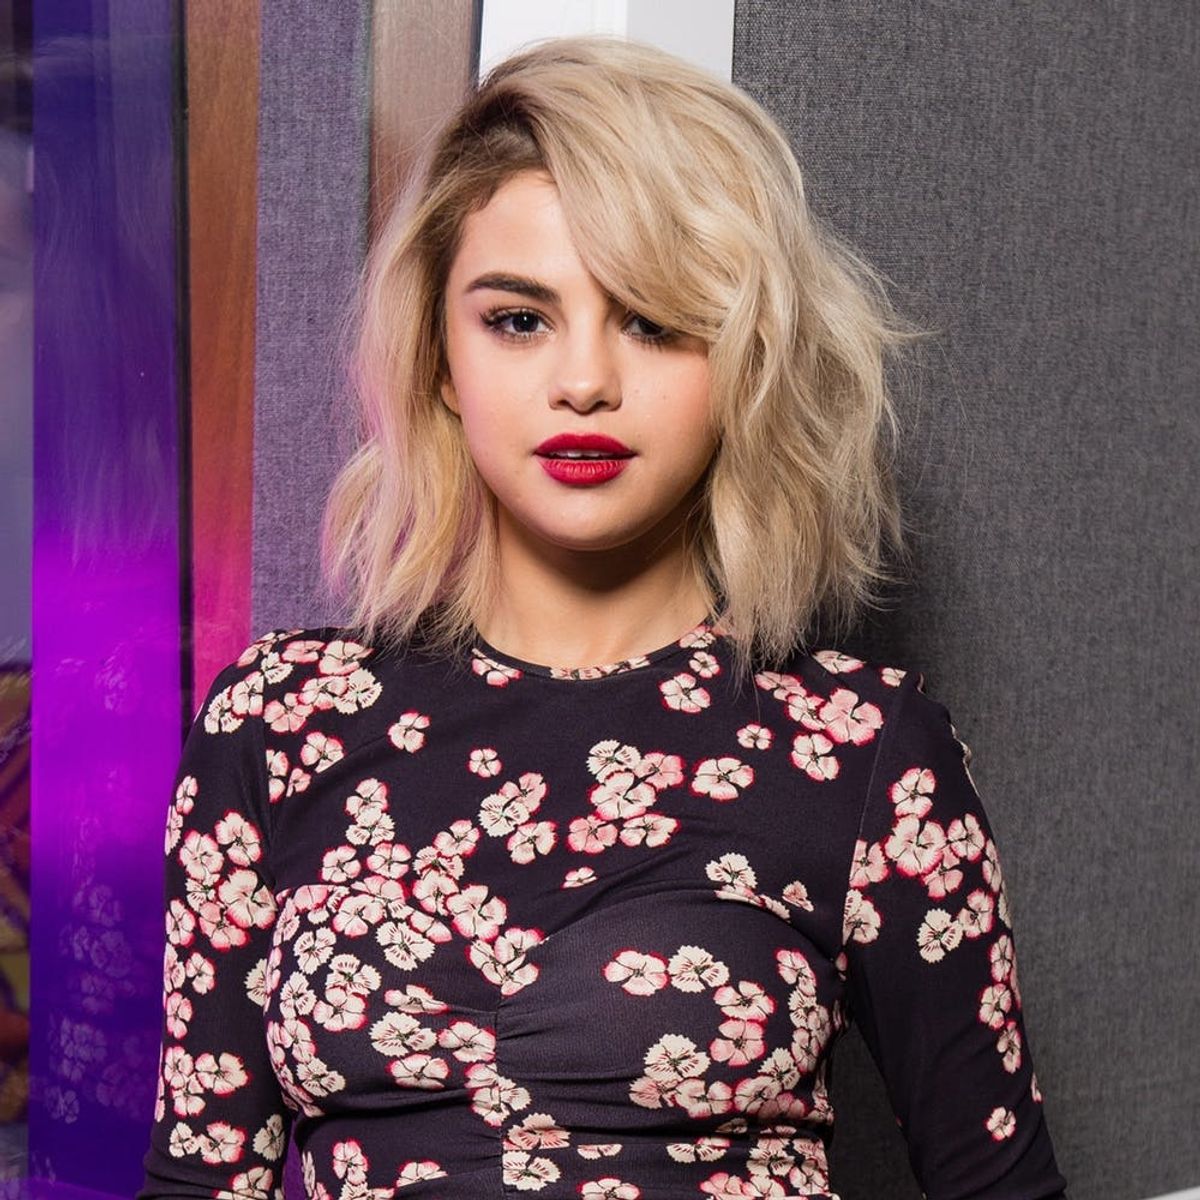 Selena Gomez Makes Her Instagram Private After Cryptic Post